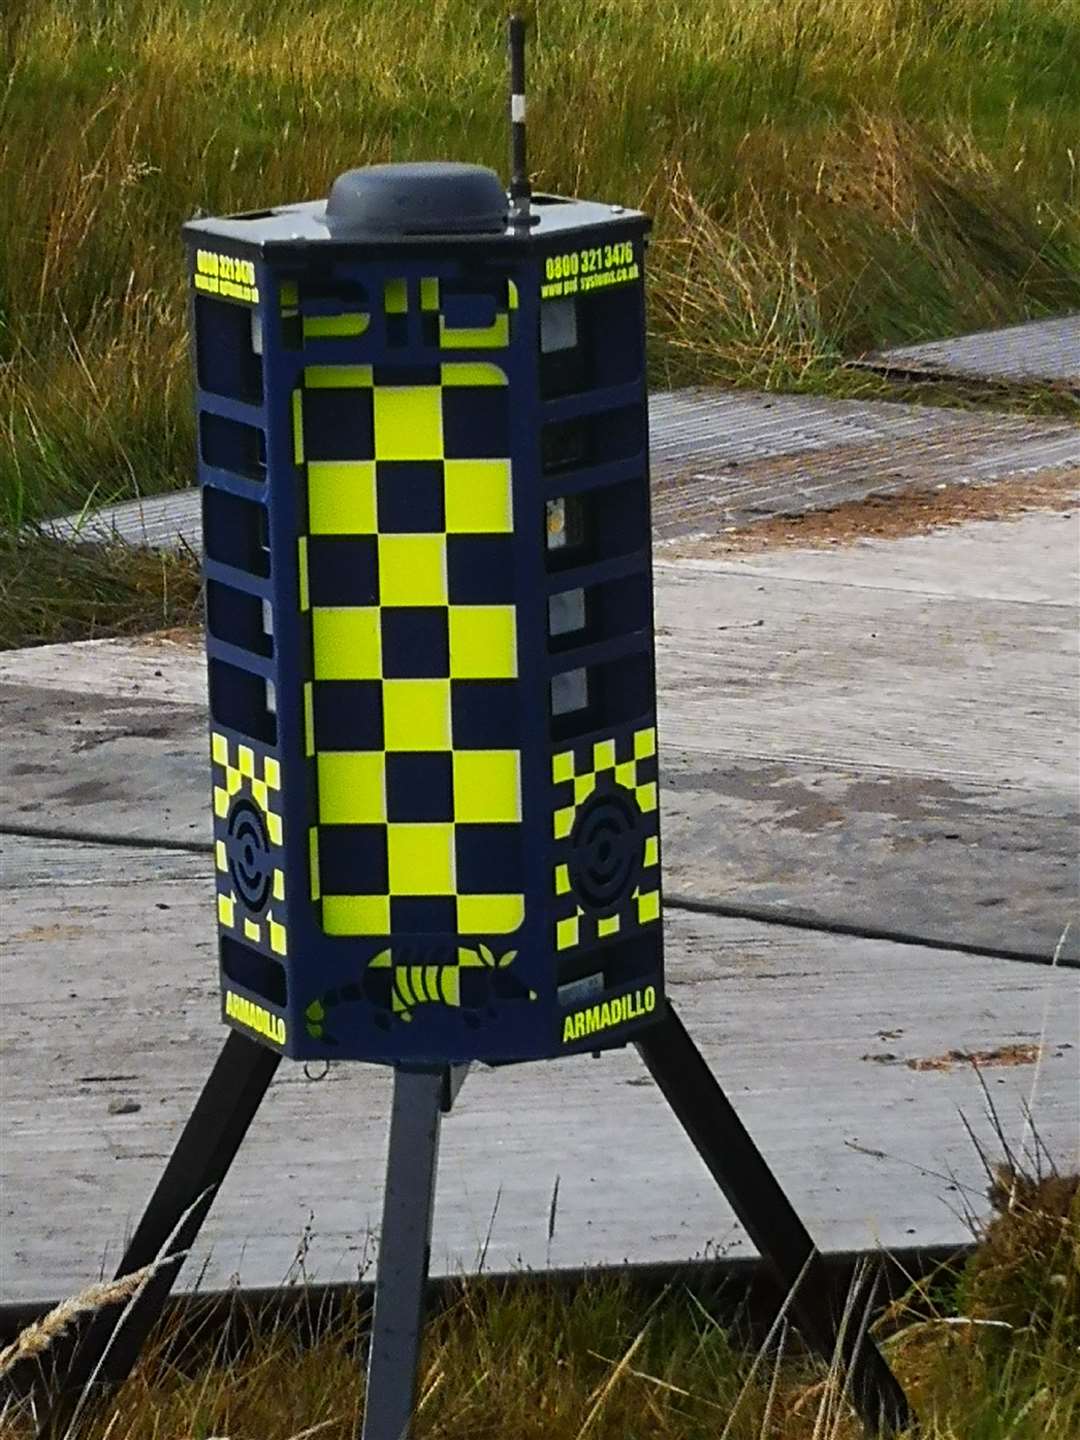 David Craig said he was astonished to encounter this 'Dalek-type' device at the Limekiln site recently.